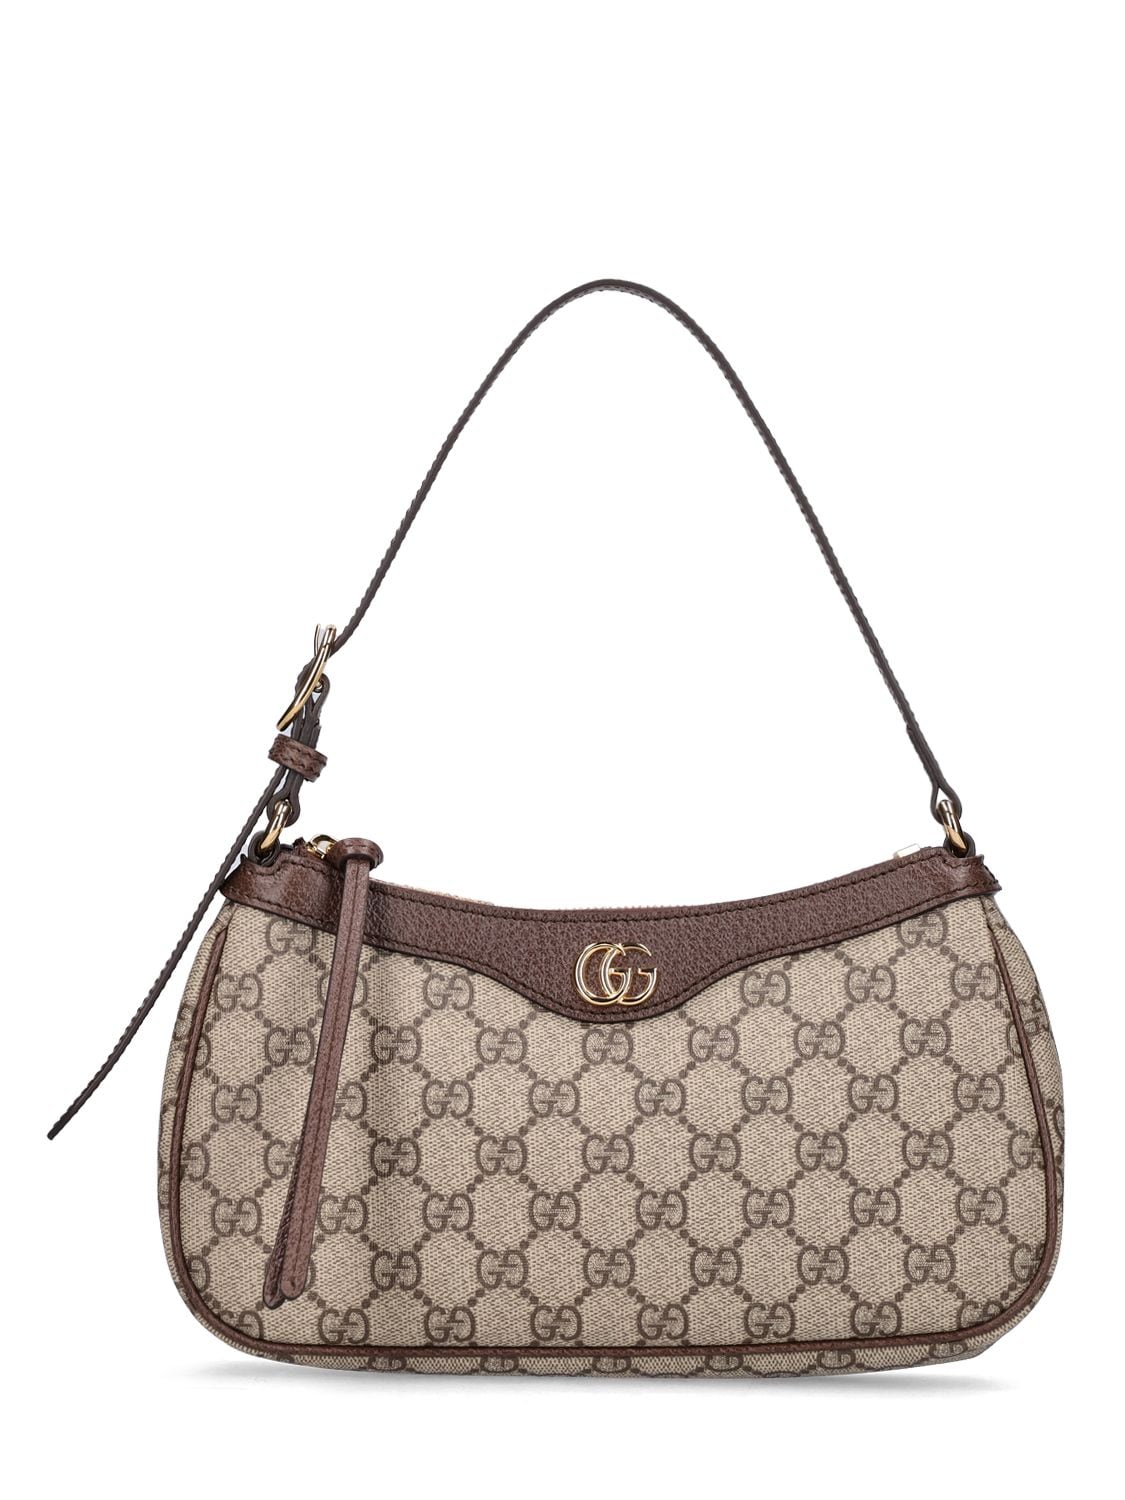 Gucci Ophidia GG Shoulder Bag Small Beige/Ebony in Canvas/Leather